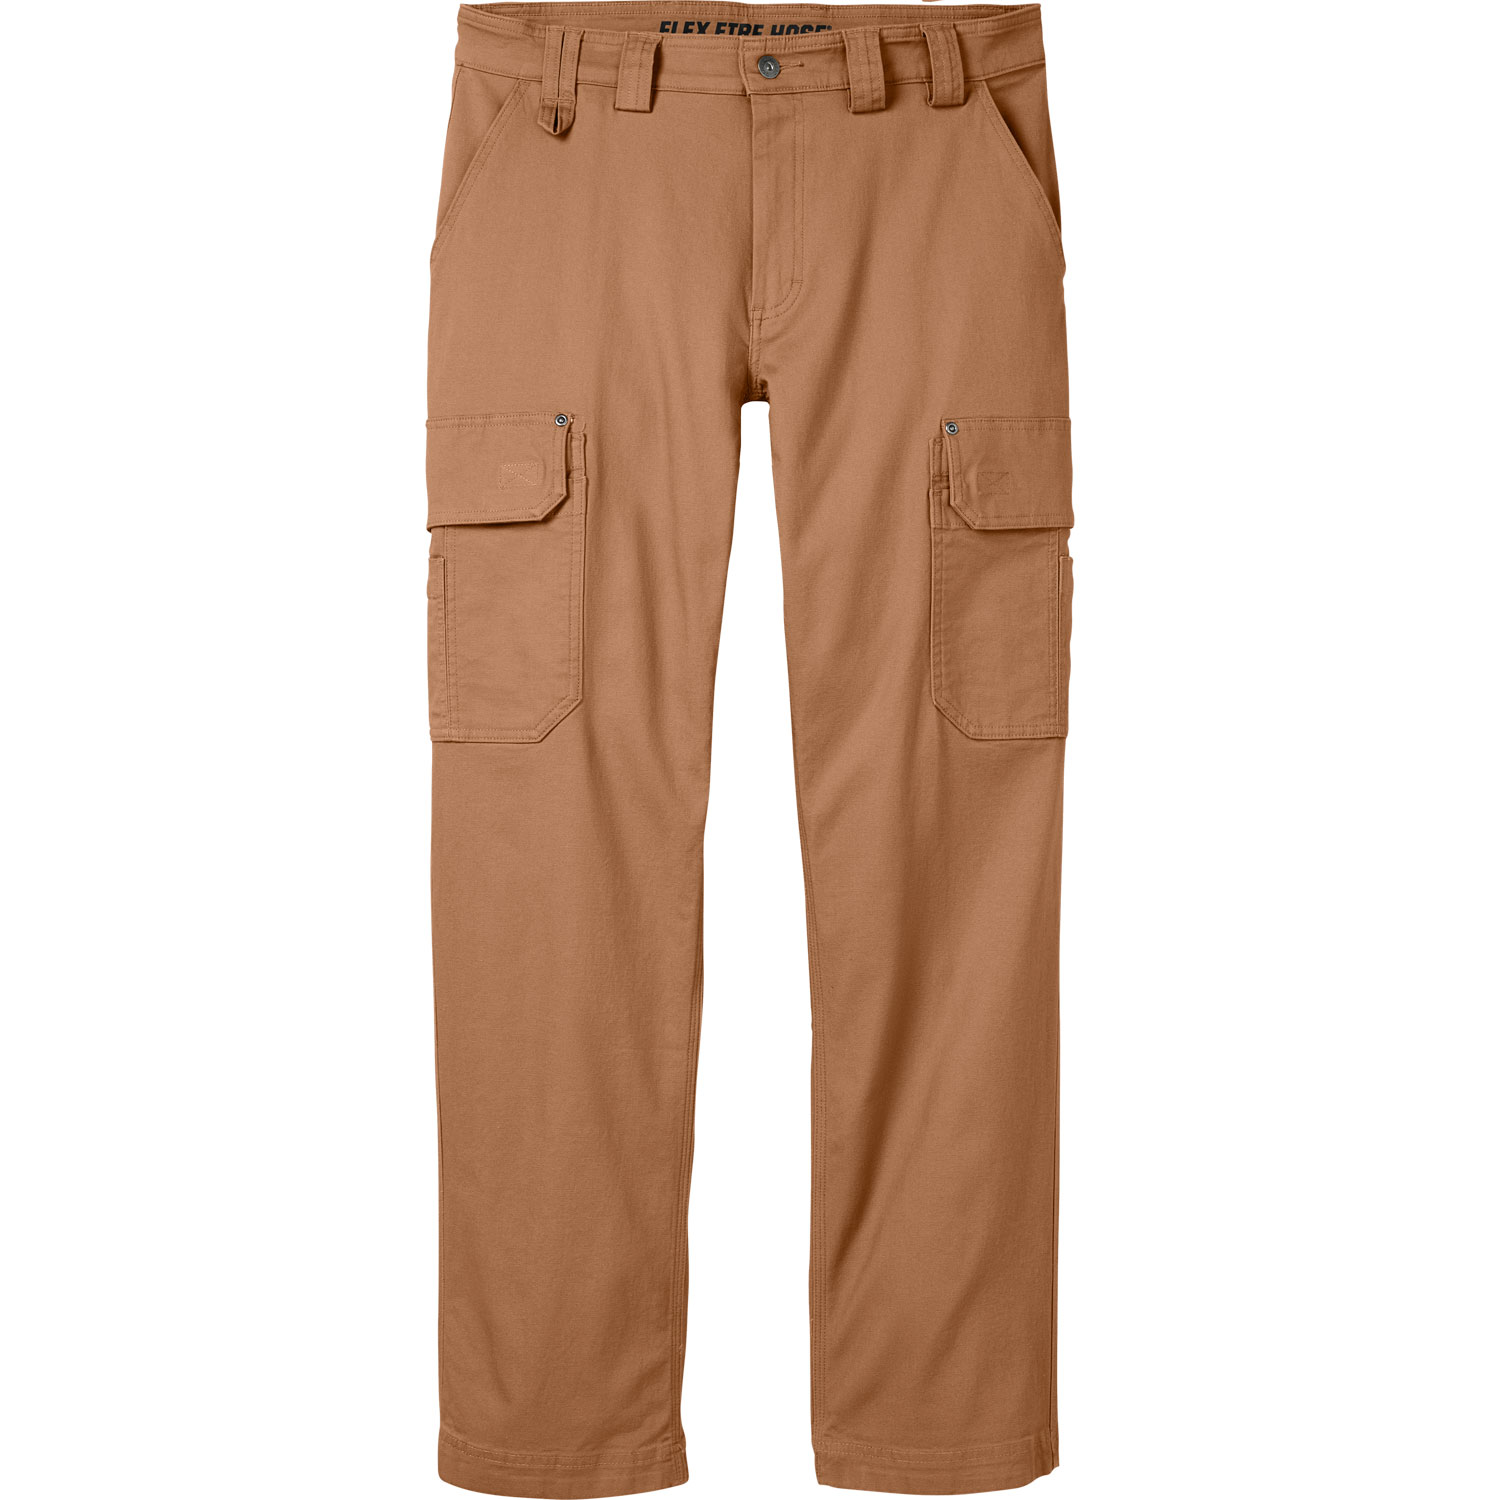 Duluth Trading Company, olive twill cargo work pants, size 14/31 - $27 -  From Resale